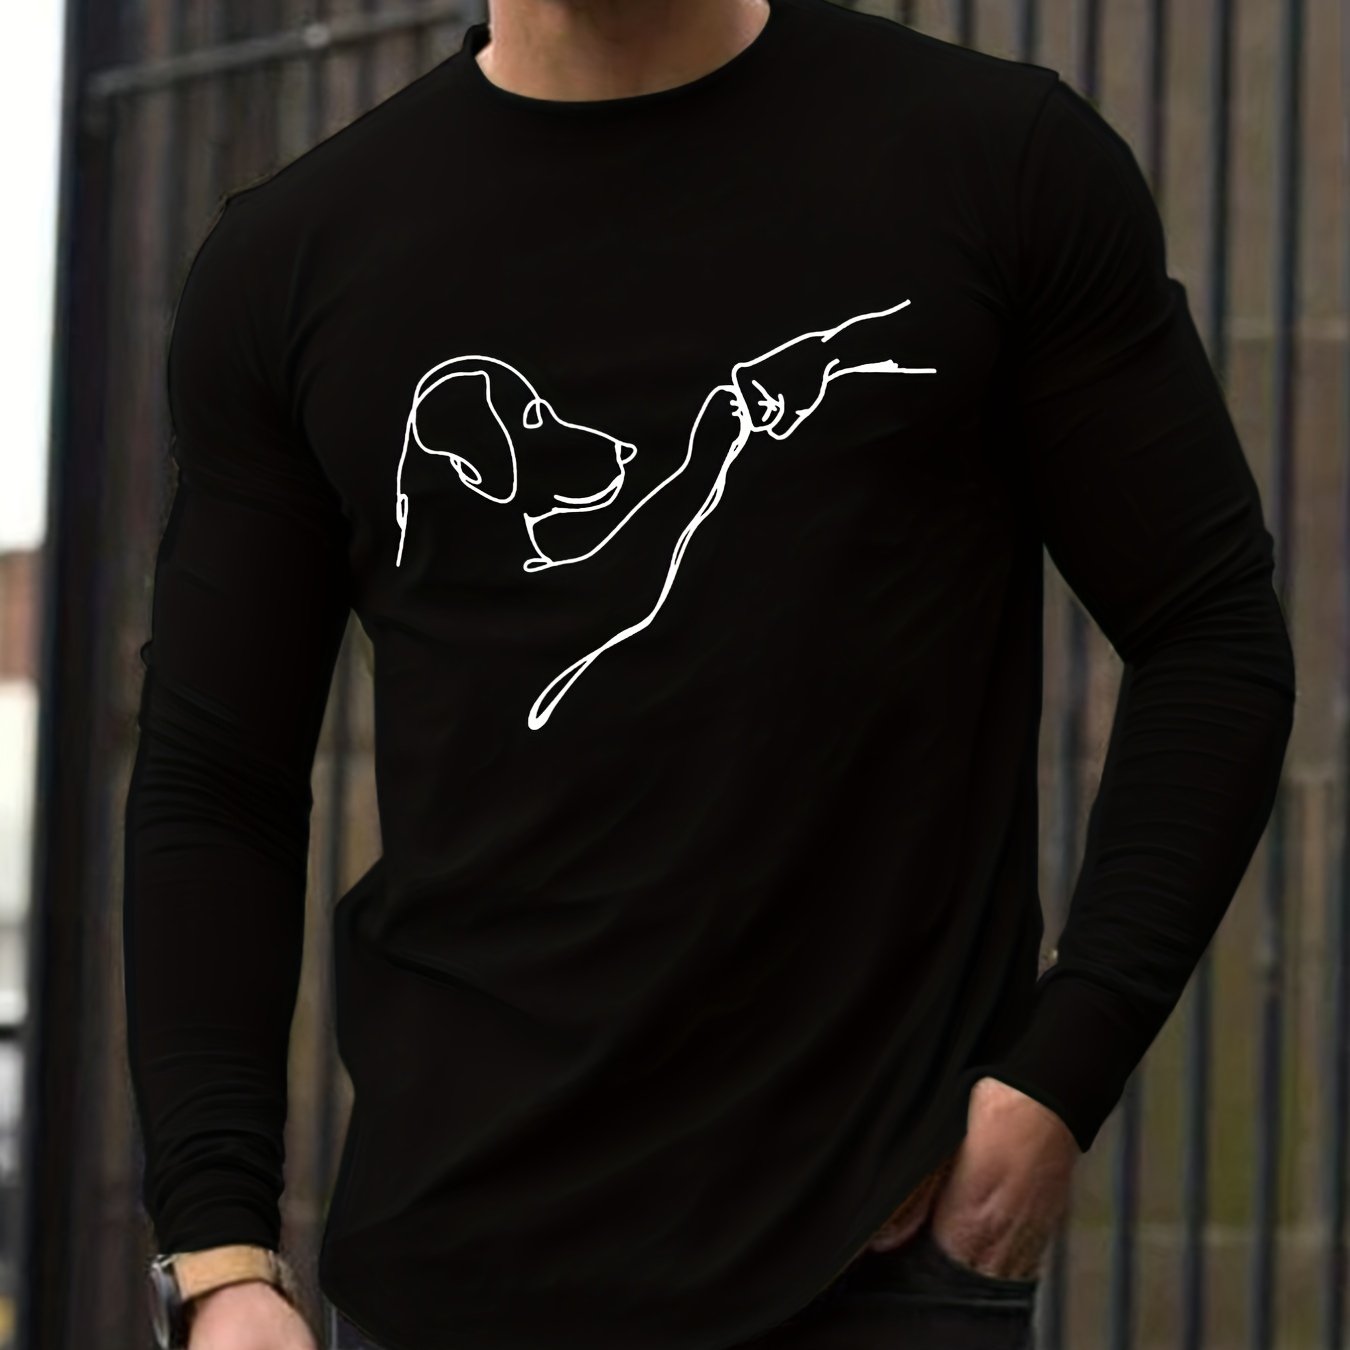 Simple Dog Print Men's Long Sleeve Fit T-shirt For Spring Fall, Men's All-match Crew Neck Tops